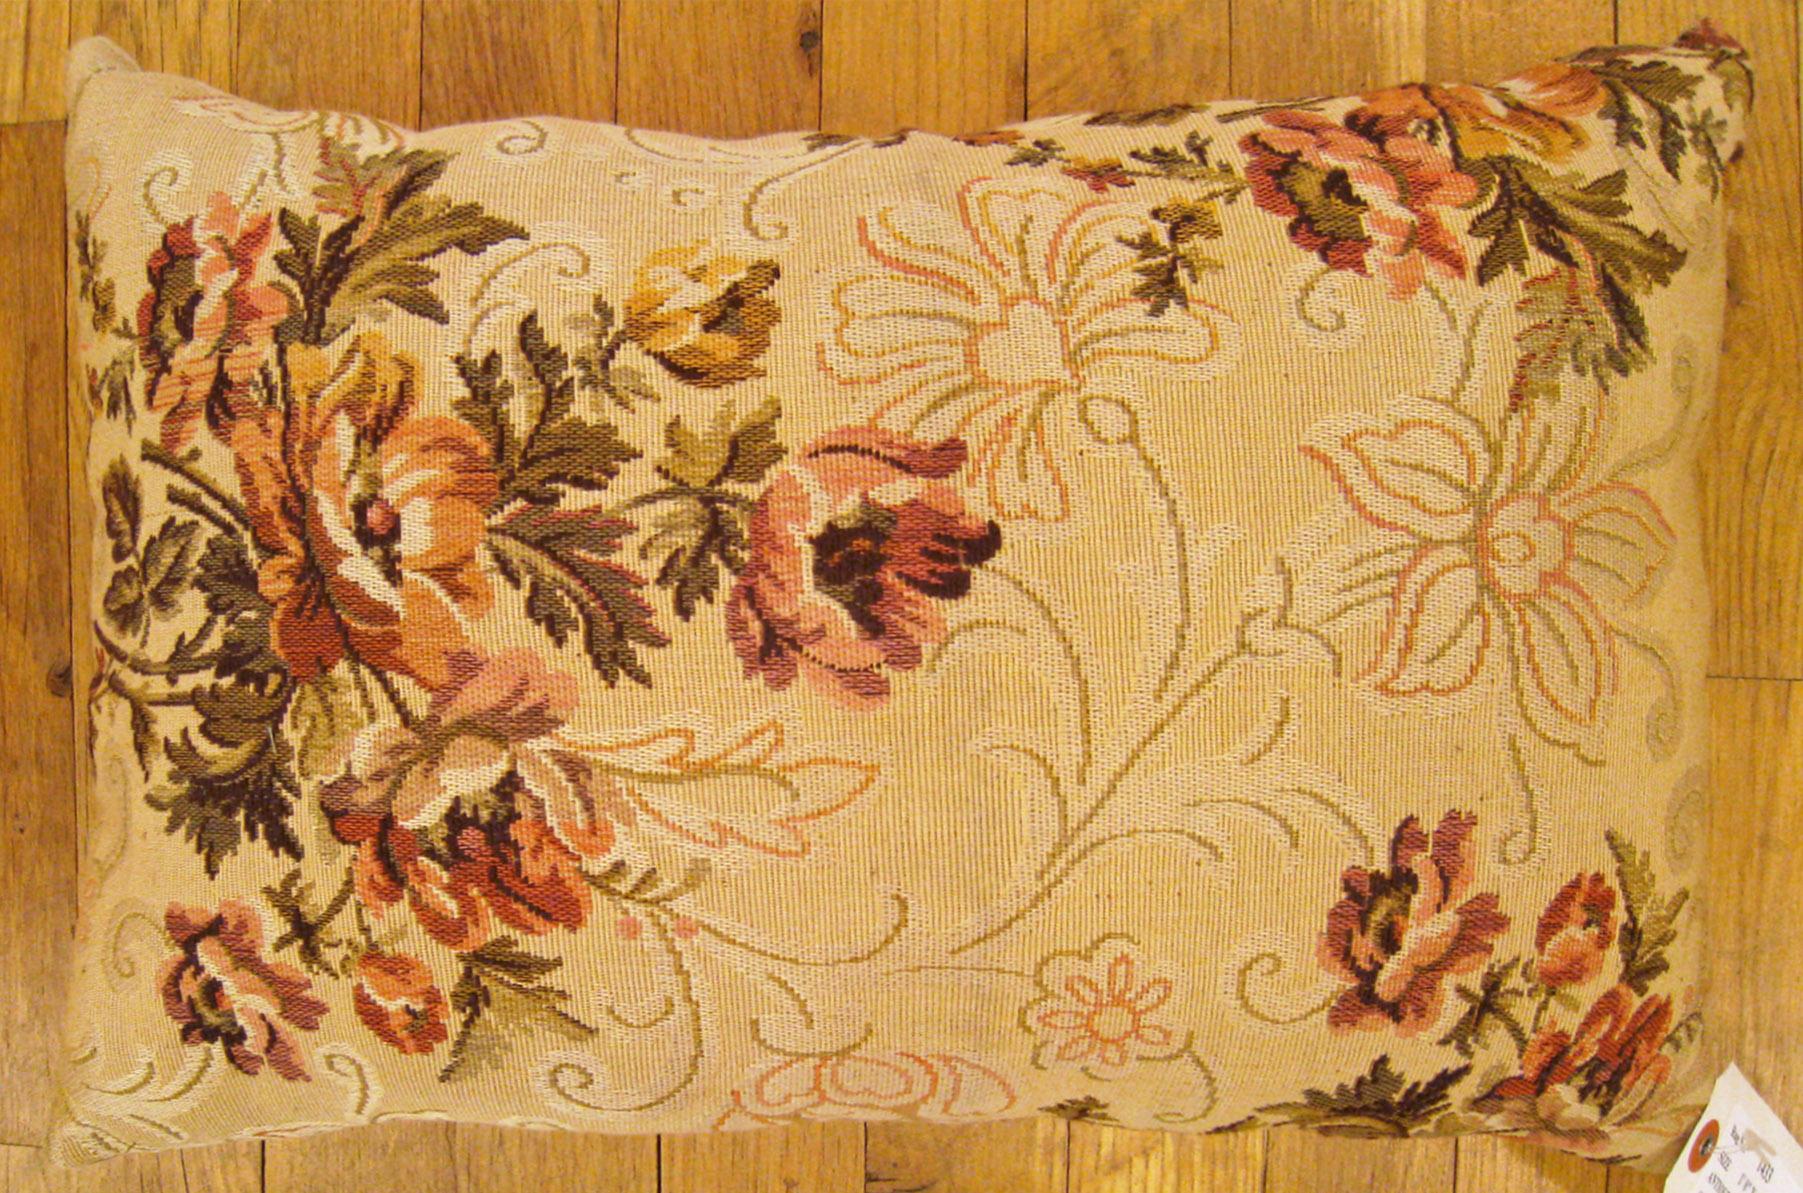 Antique Jacquard Tapestry Pillow; size 1'0” x 1'7”. 

An antique decorative pillow with floral elements allover a light gold central field, size 1'0